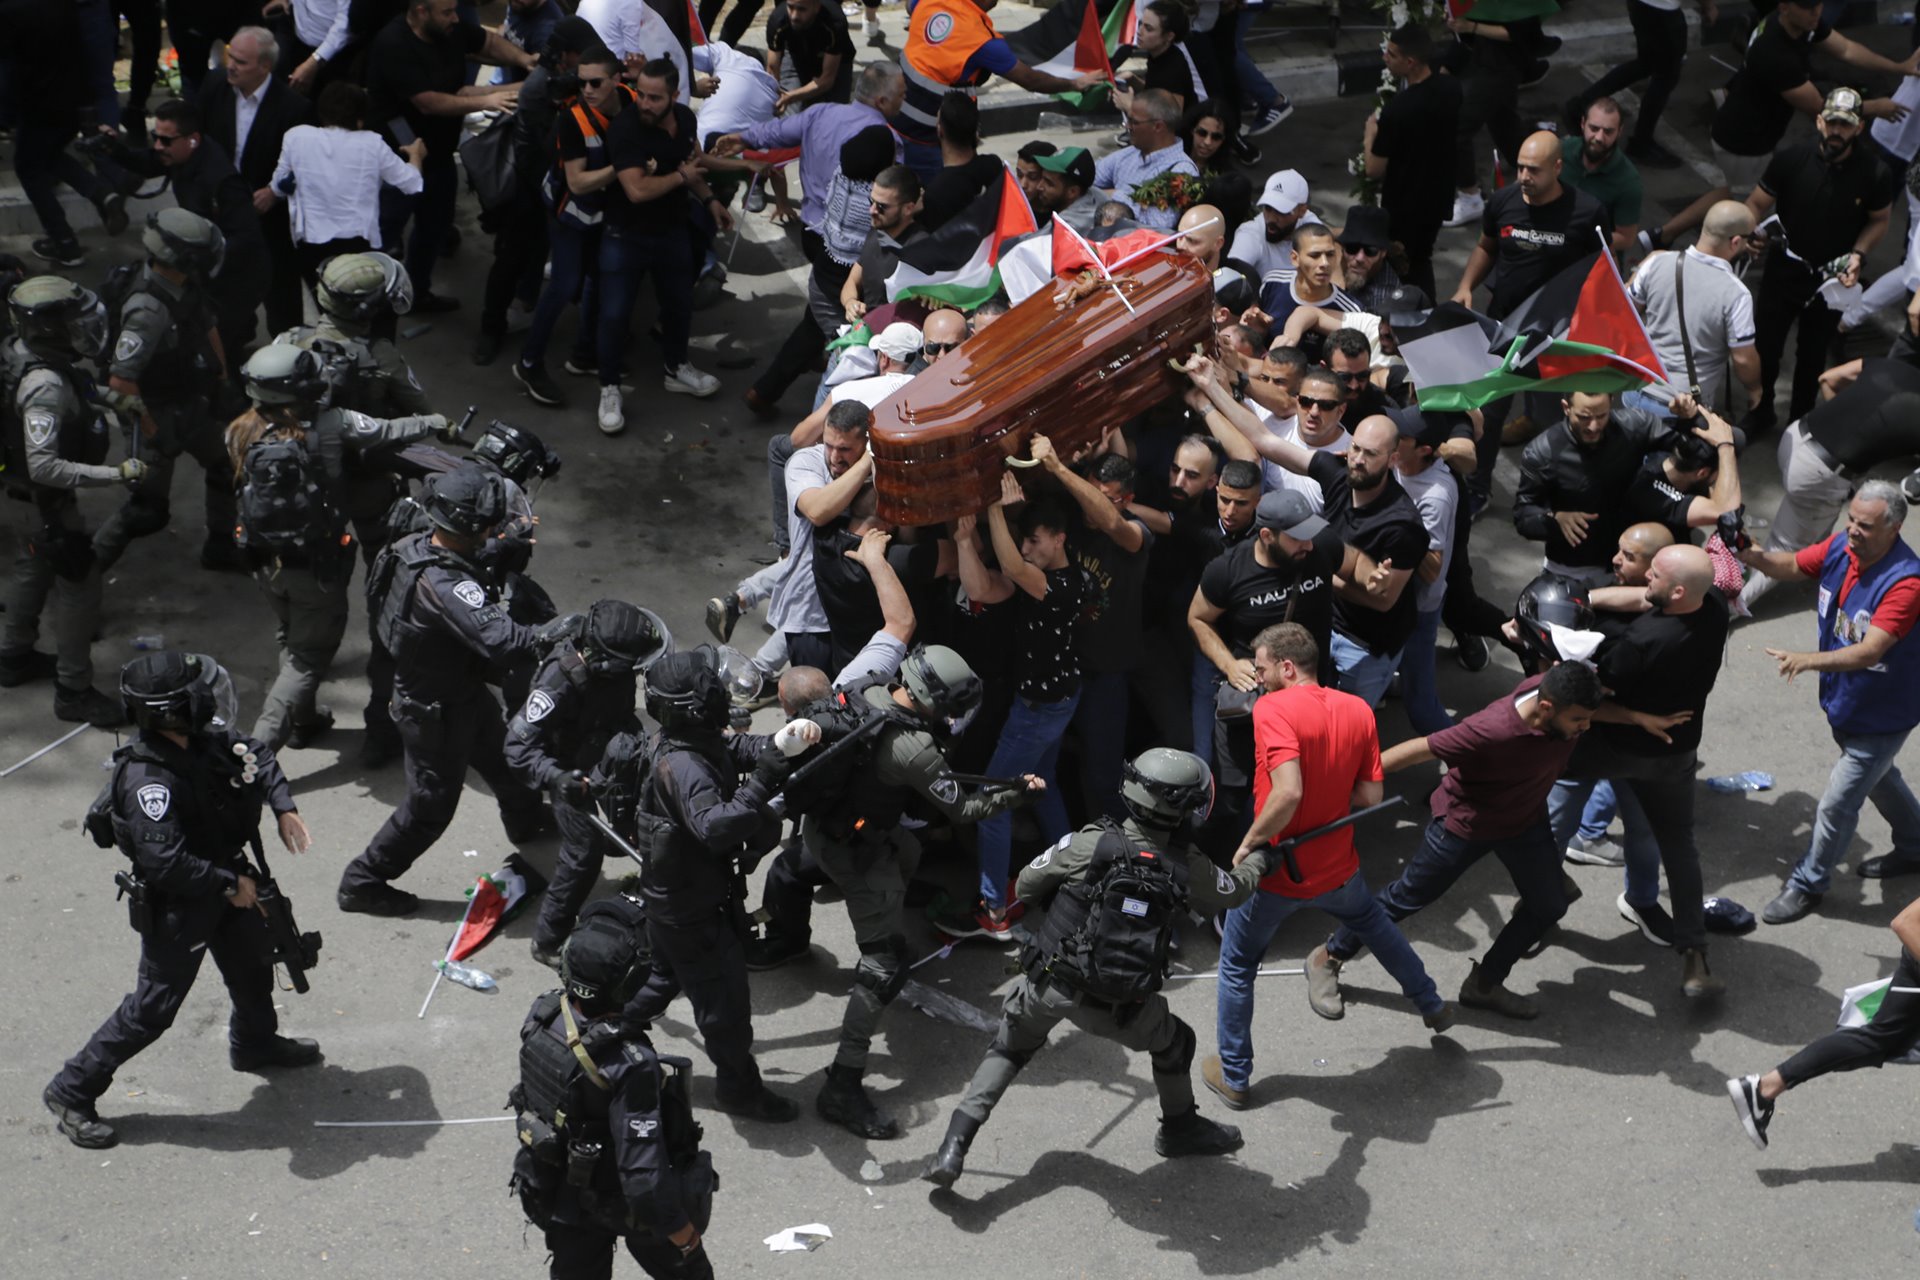 Israeli police beat mourners accompanying the coffin of Al Jazeera journalist Shireen Abu Akleh to her funeral, in East Jerusalem. Police prohibited people from carrying the coffin on foot through the city, which is customary for notable deaths, as mourners chanted &ldquo;We sacrifice our soul and blood for you, Shireen&rdquo;.